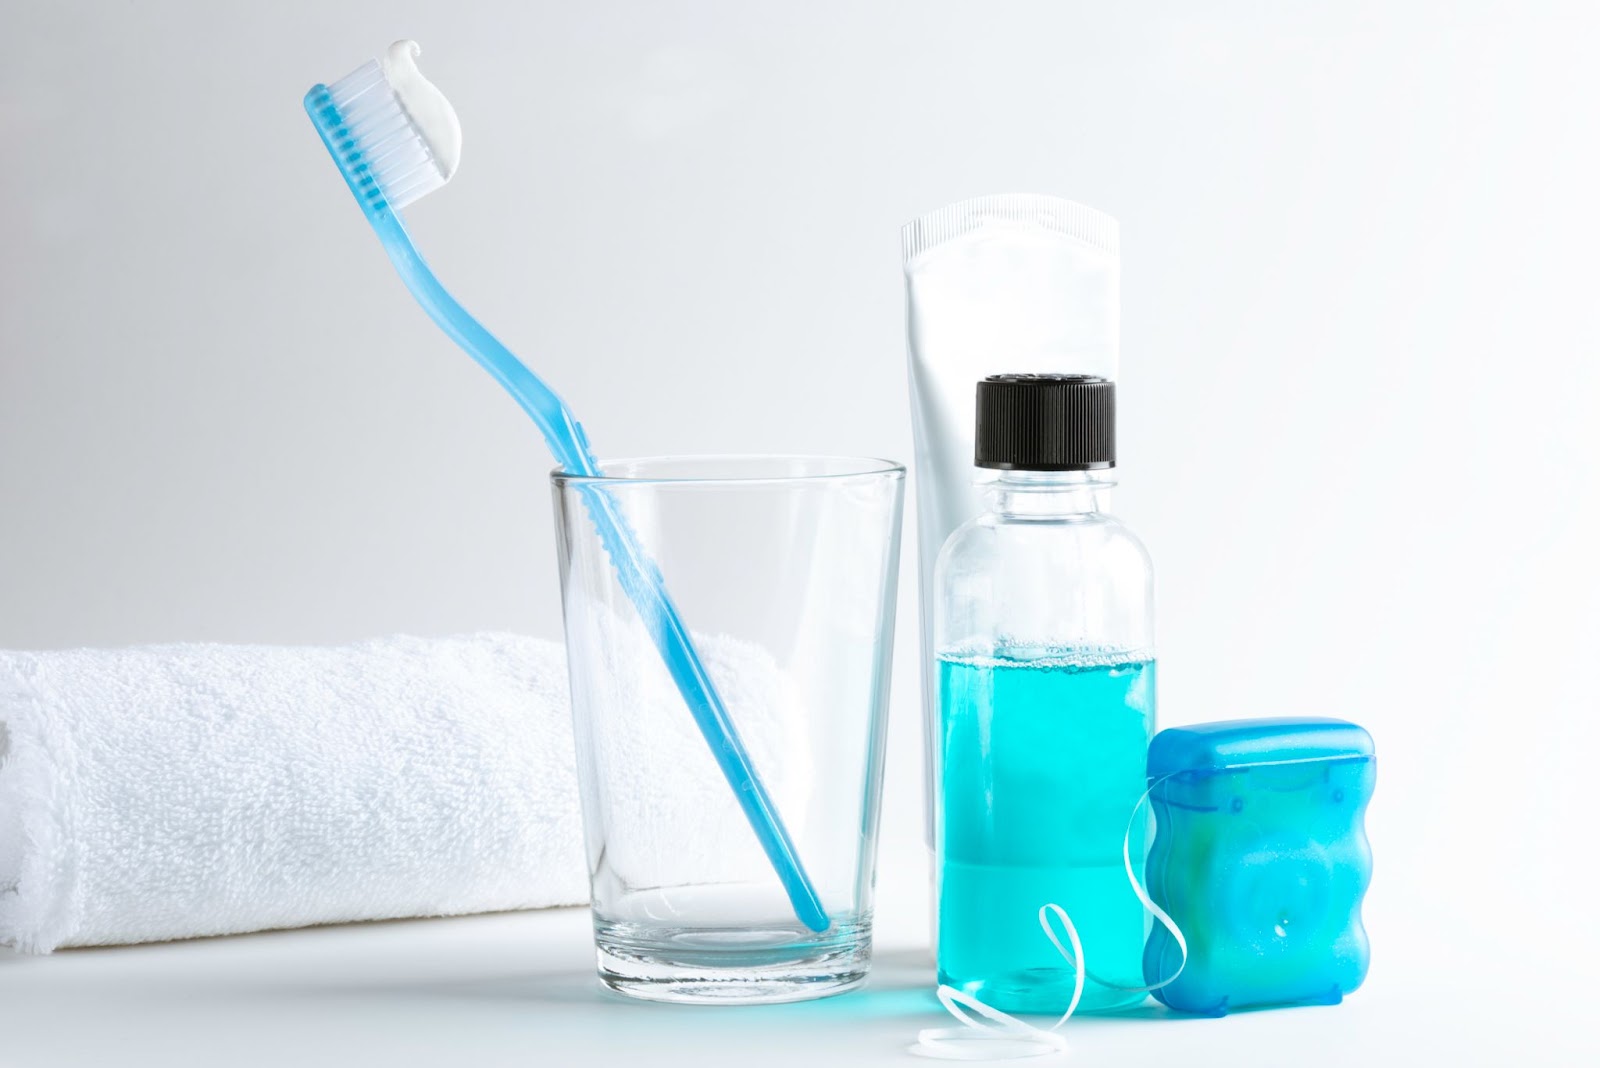 Optimal oral hygiene with brushing, flossing, and mouthwash